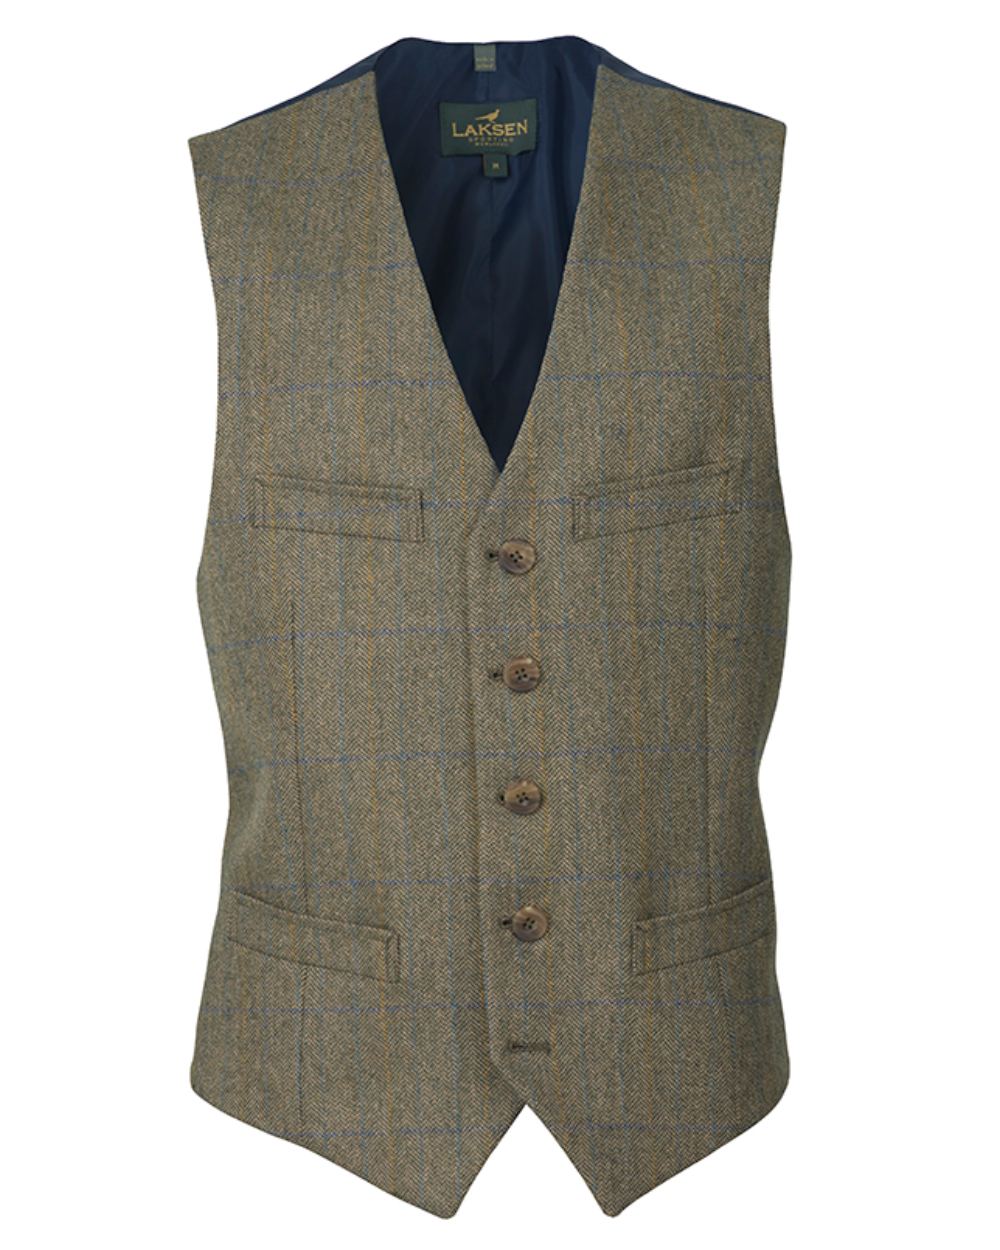 Laksen Laird Colonial Dress Vest On A White Background